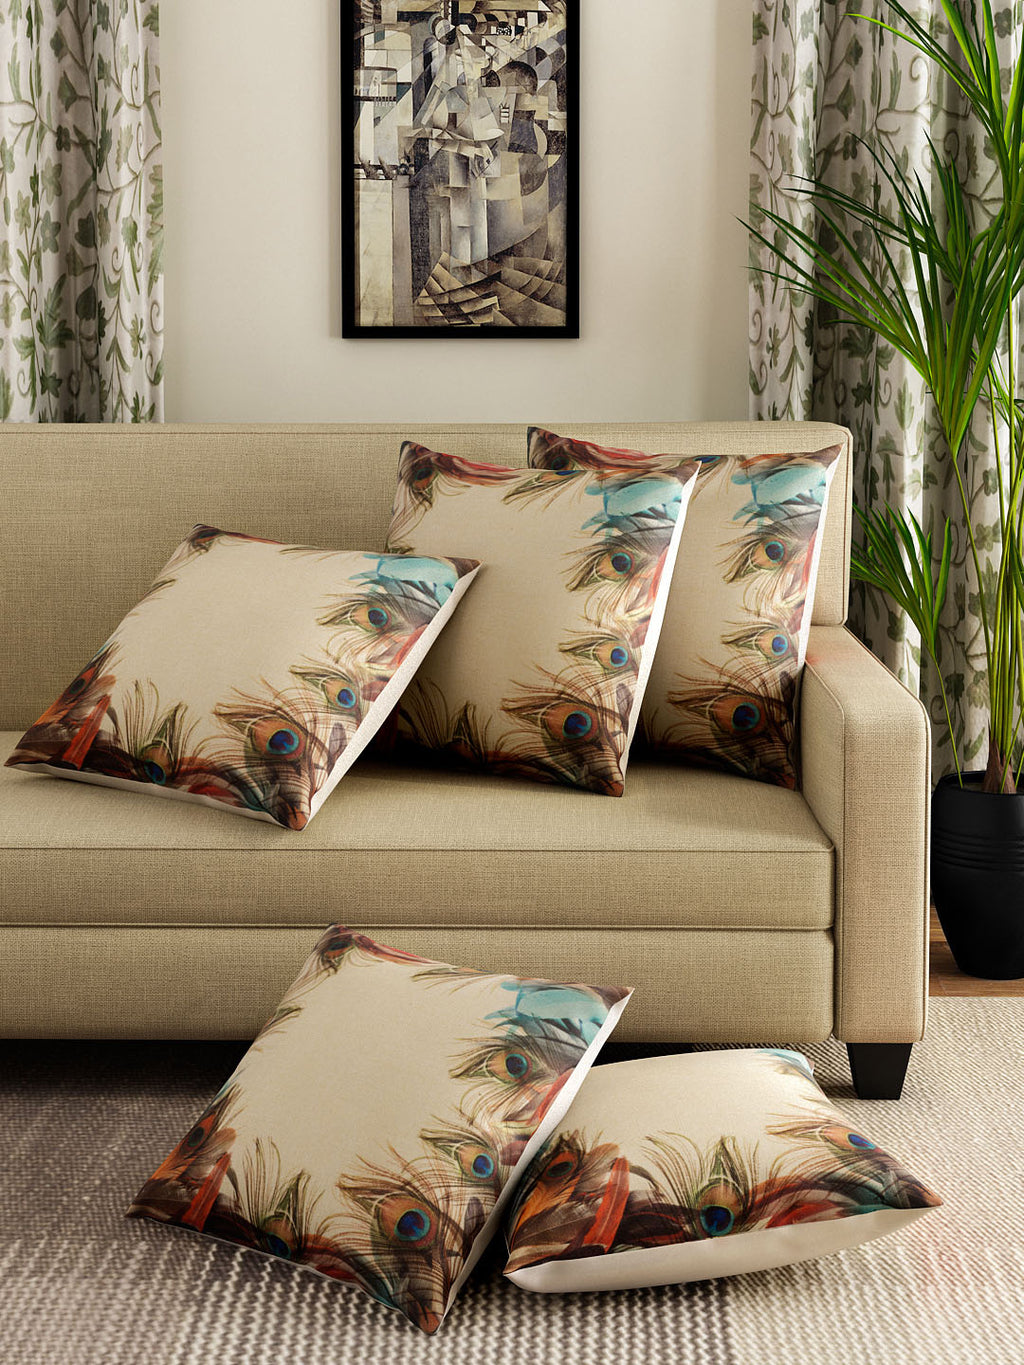 Detec™ Hosta Beige Color 16 x 16 inches Printed Cushion Cover (Set of 5 )